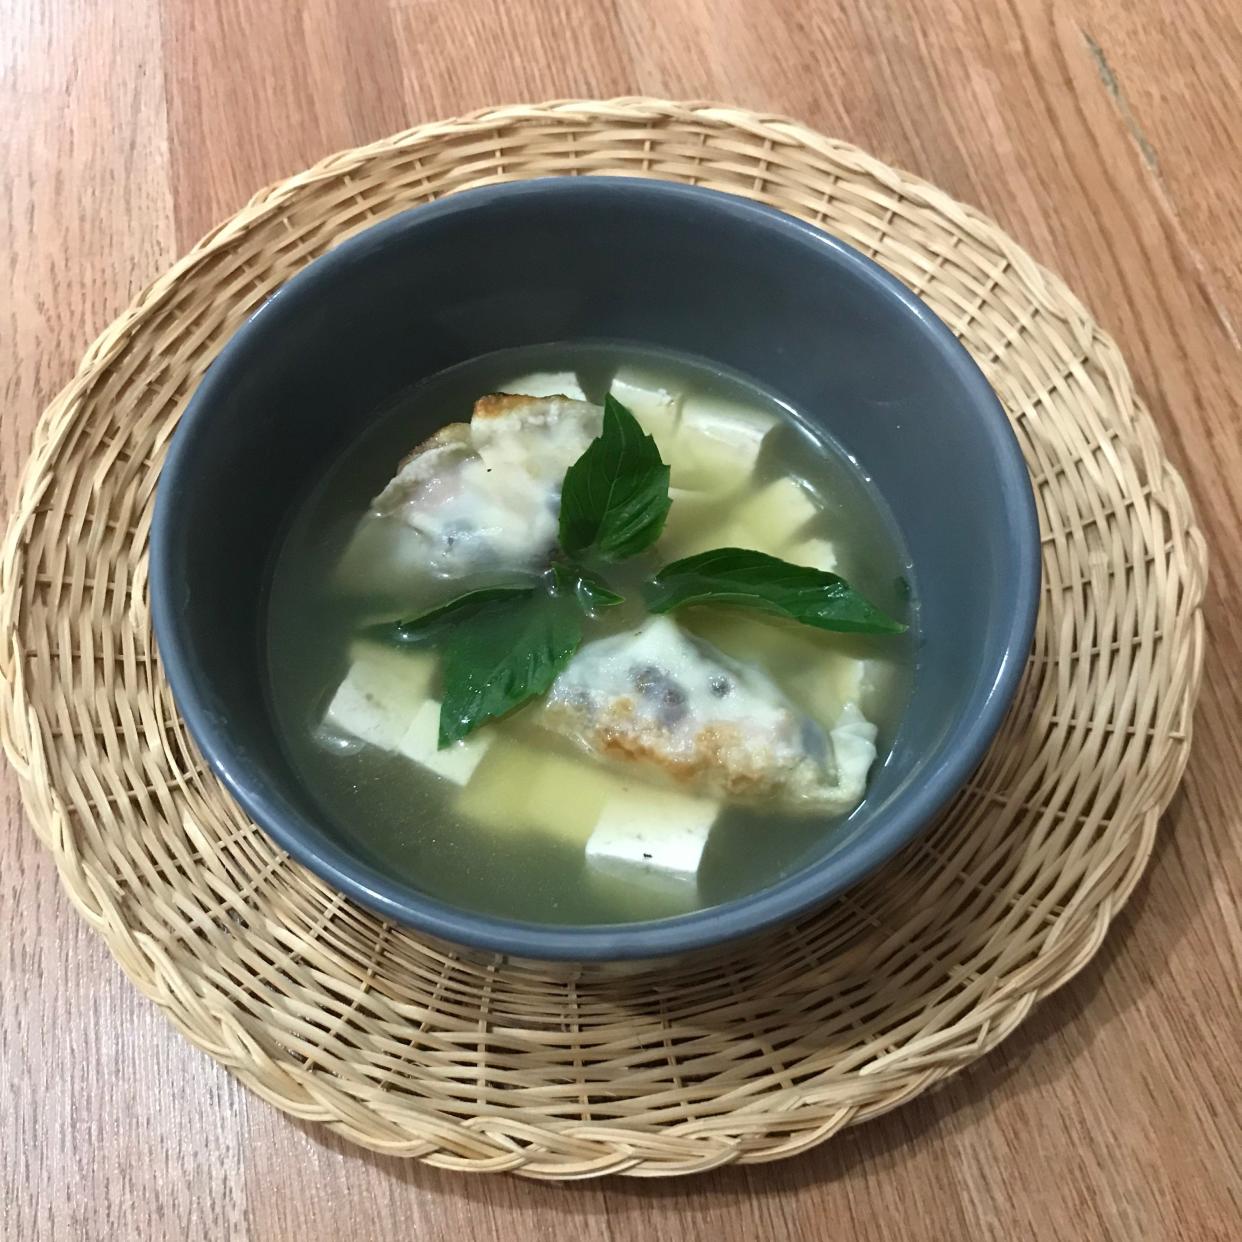 Floating dumplings in a simple soup ... it's a delicious summer meal.